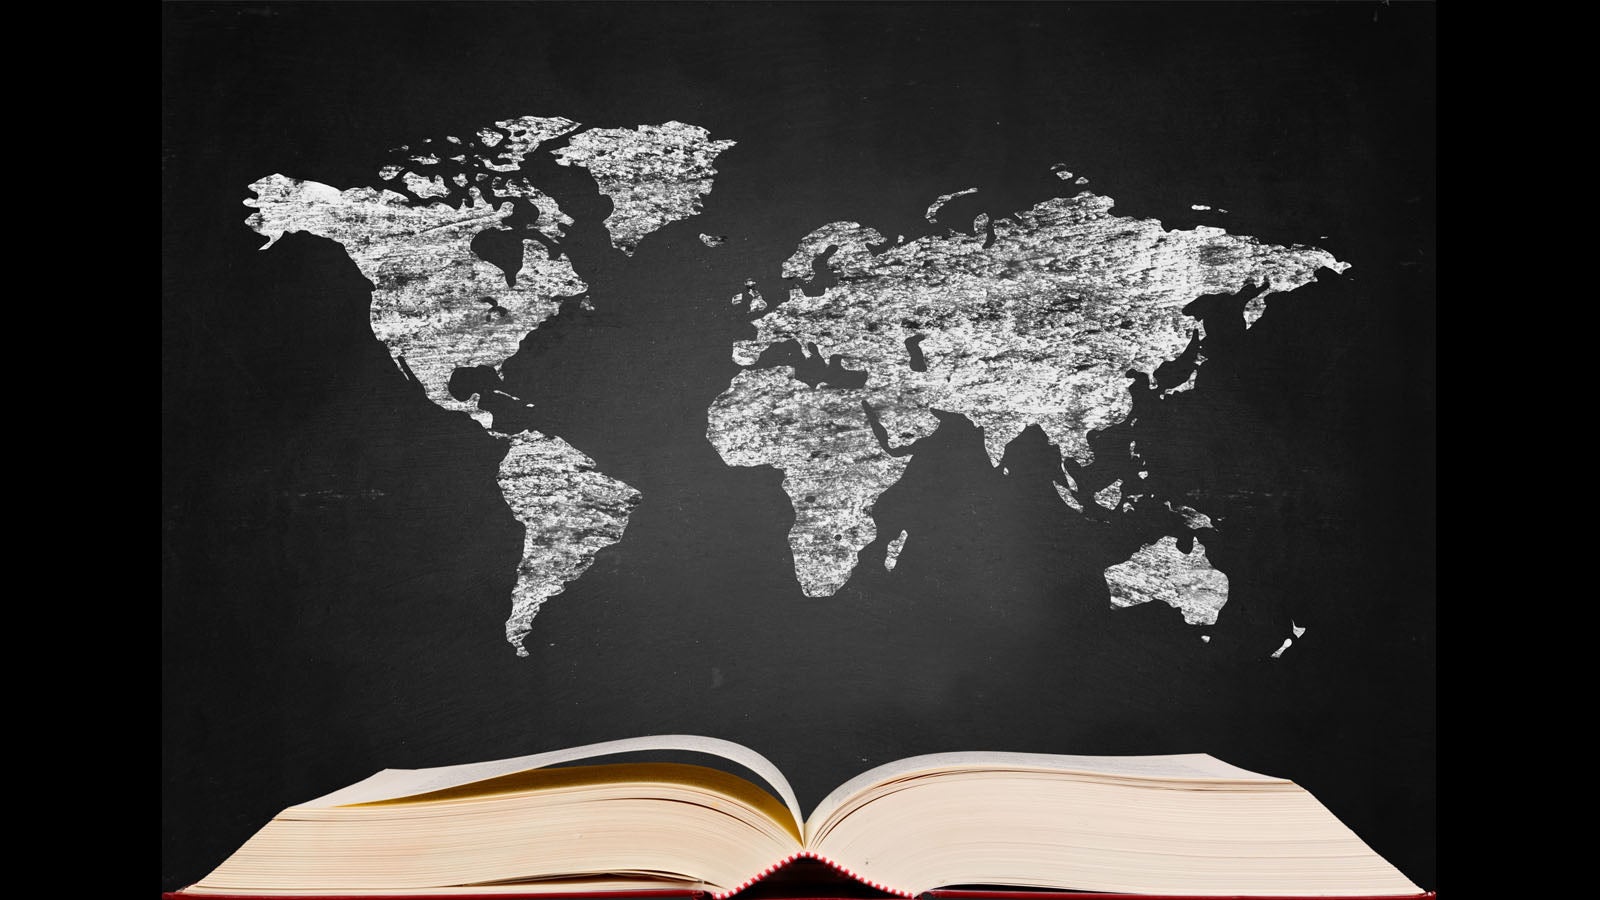 Book open in front of a world map